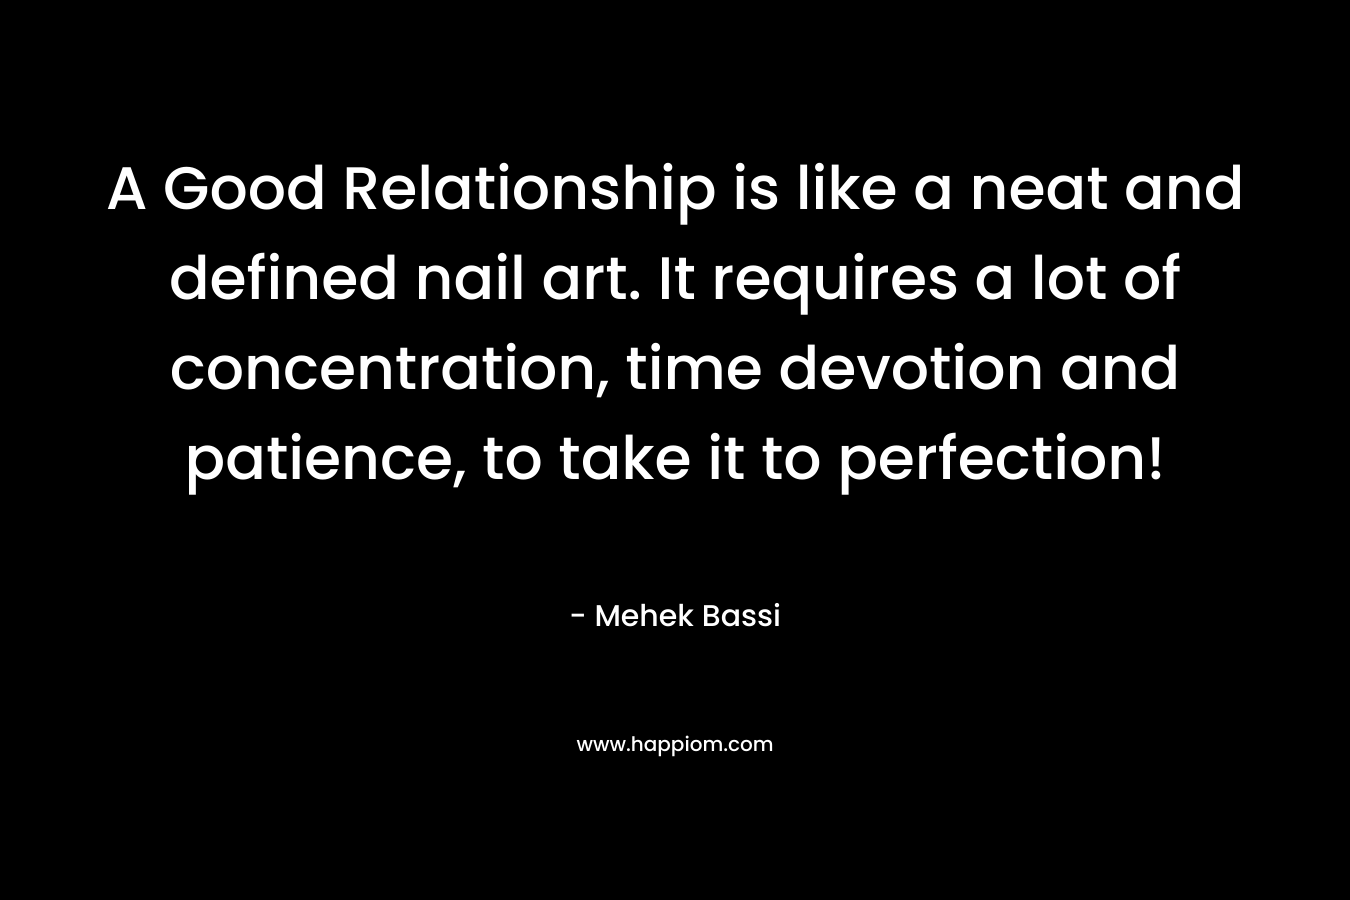 A Good Relationship is like a neat and defined nail art. It requires a lot of concentration, time devotion and patience, to take it to perfection!